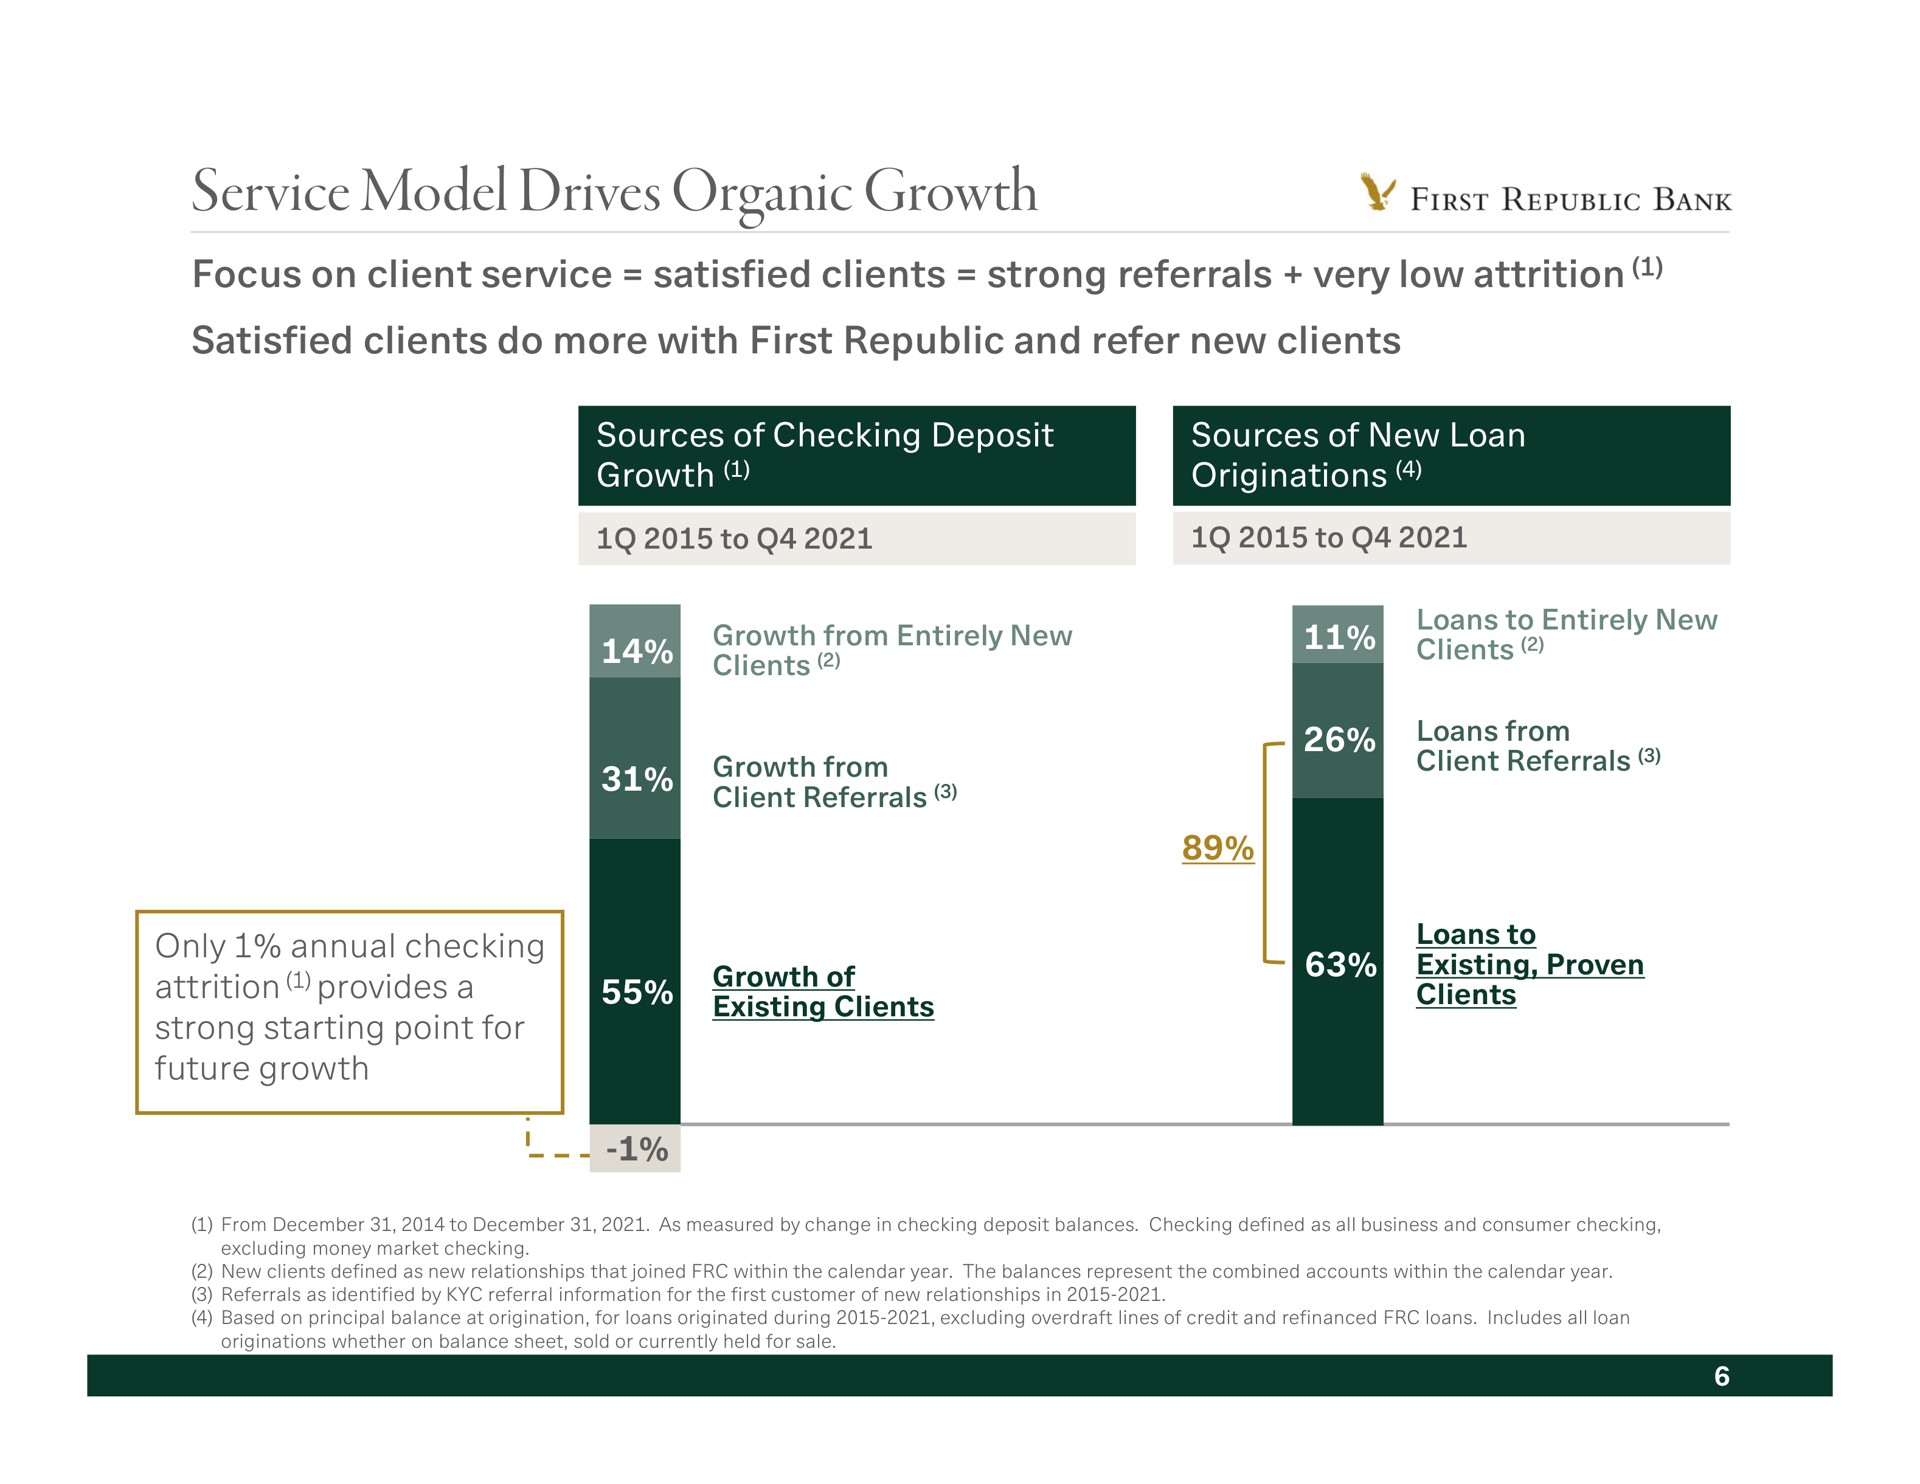 service model drives organic growth focus on client satisfied clients strong referrals very low attrition satisfied clients do more with first republic and refer new clients | First Republic Bank